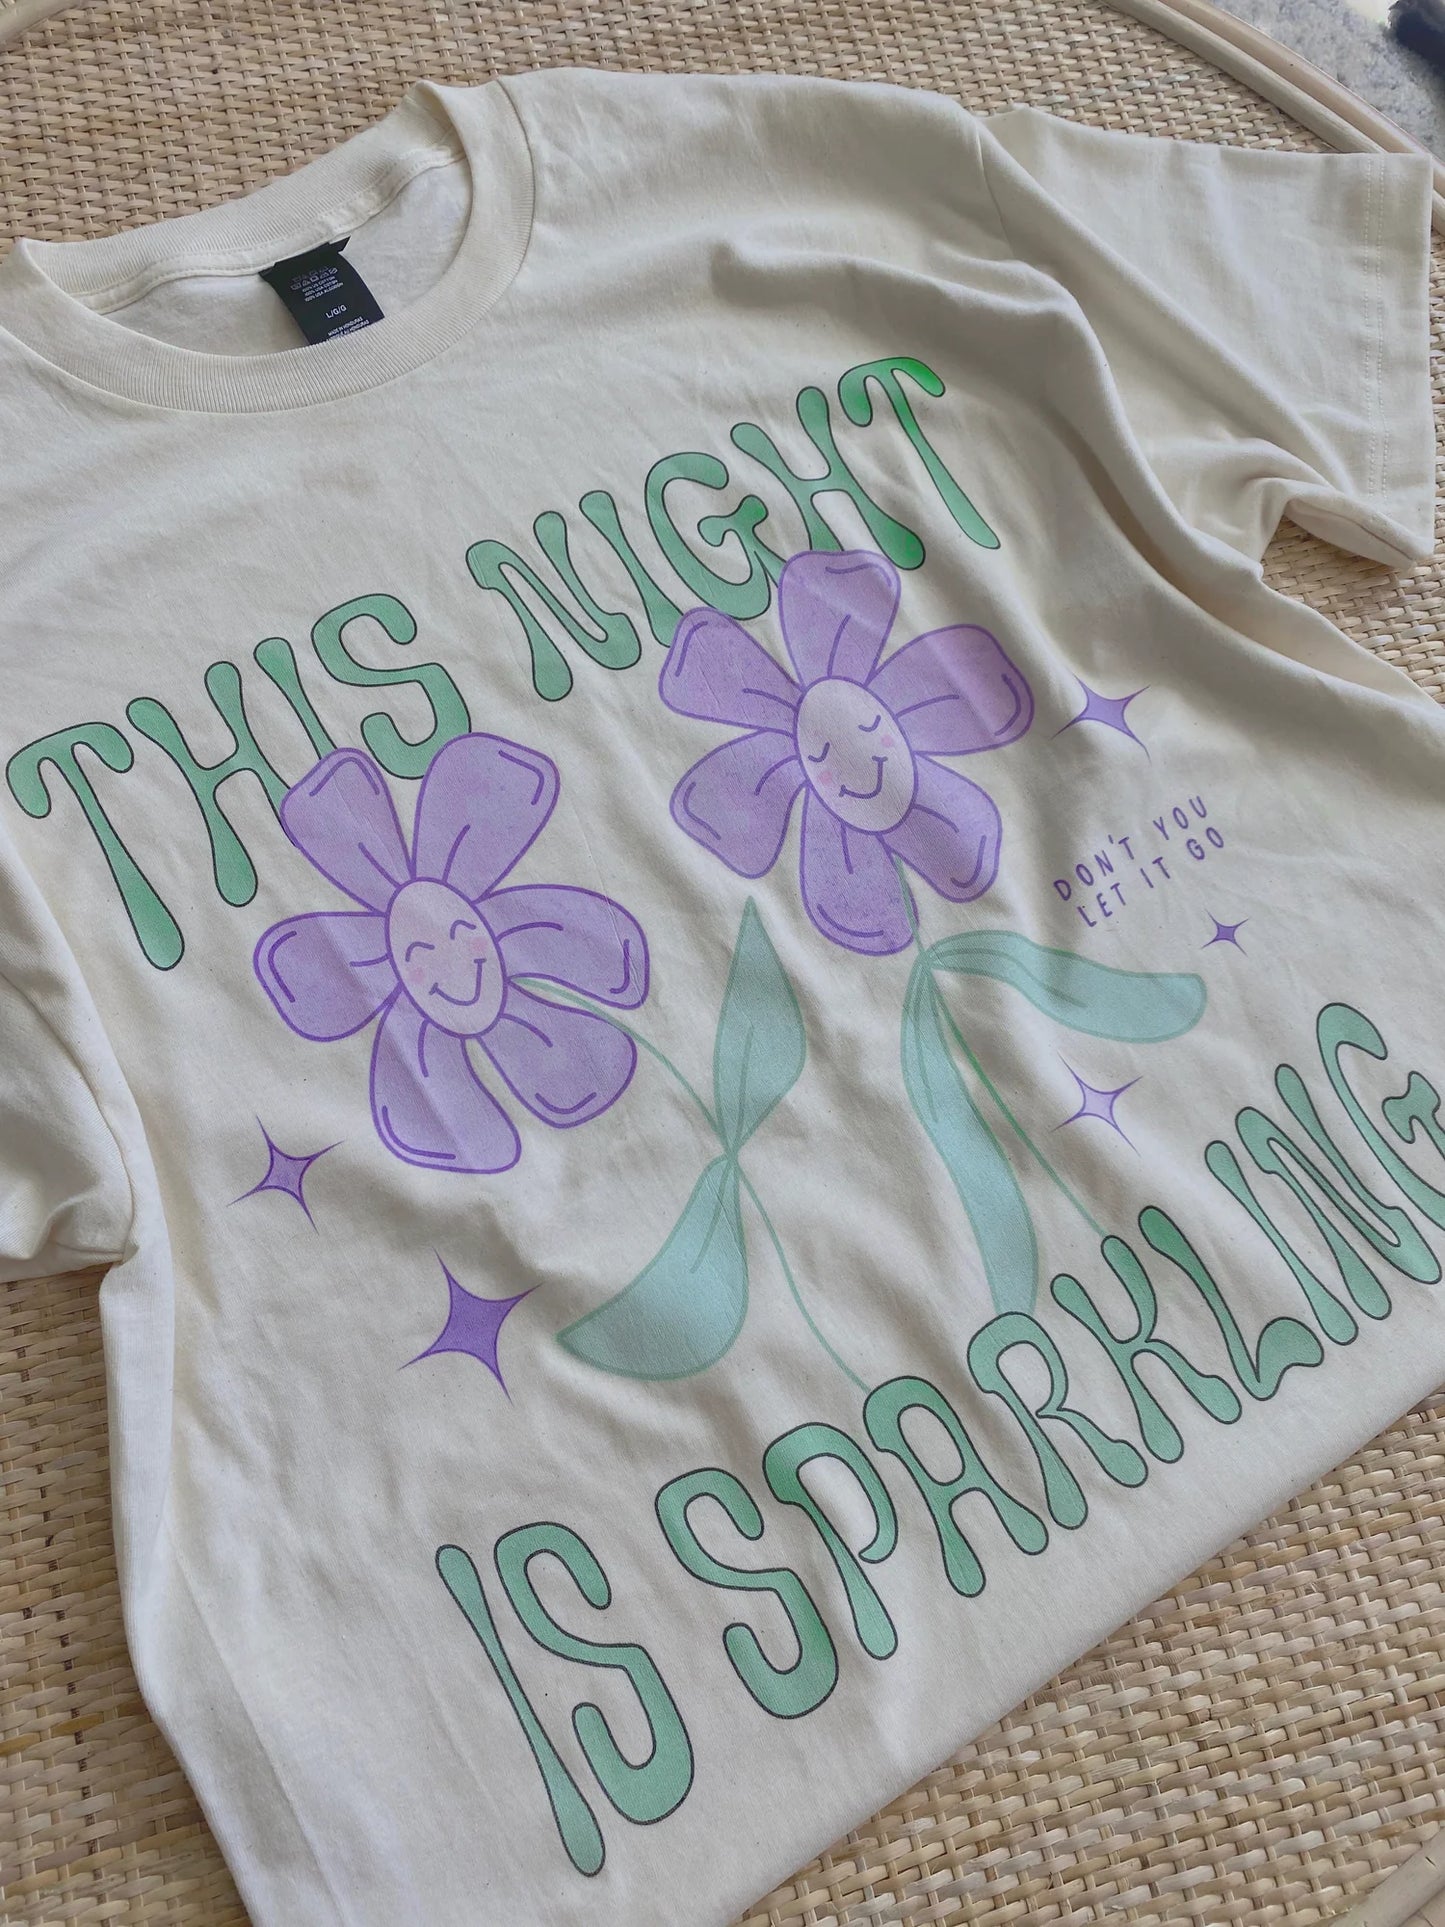 This Night Is Sparkling Comfort Colors Tee